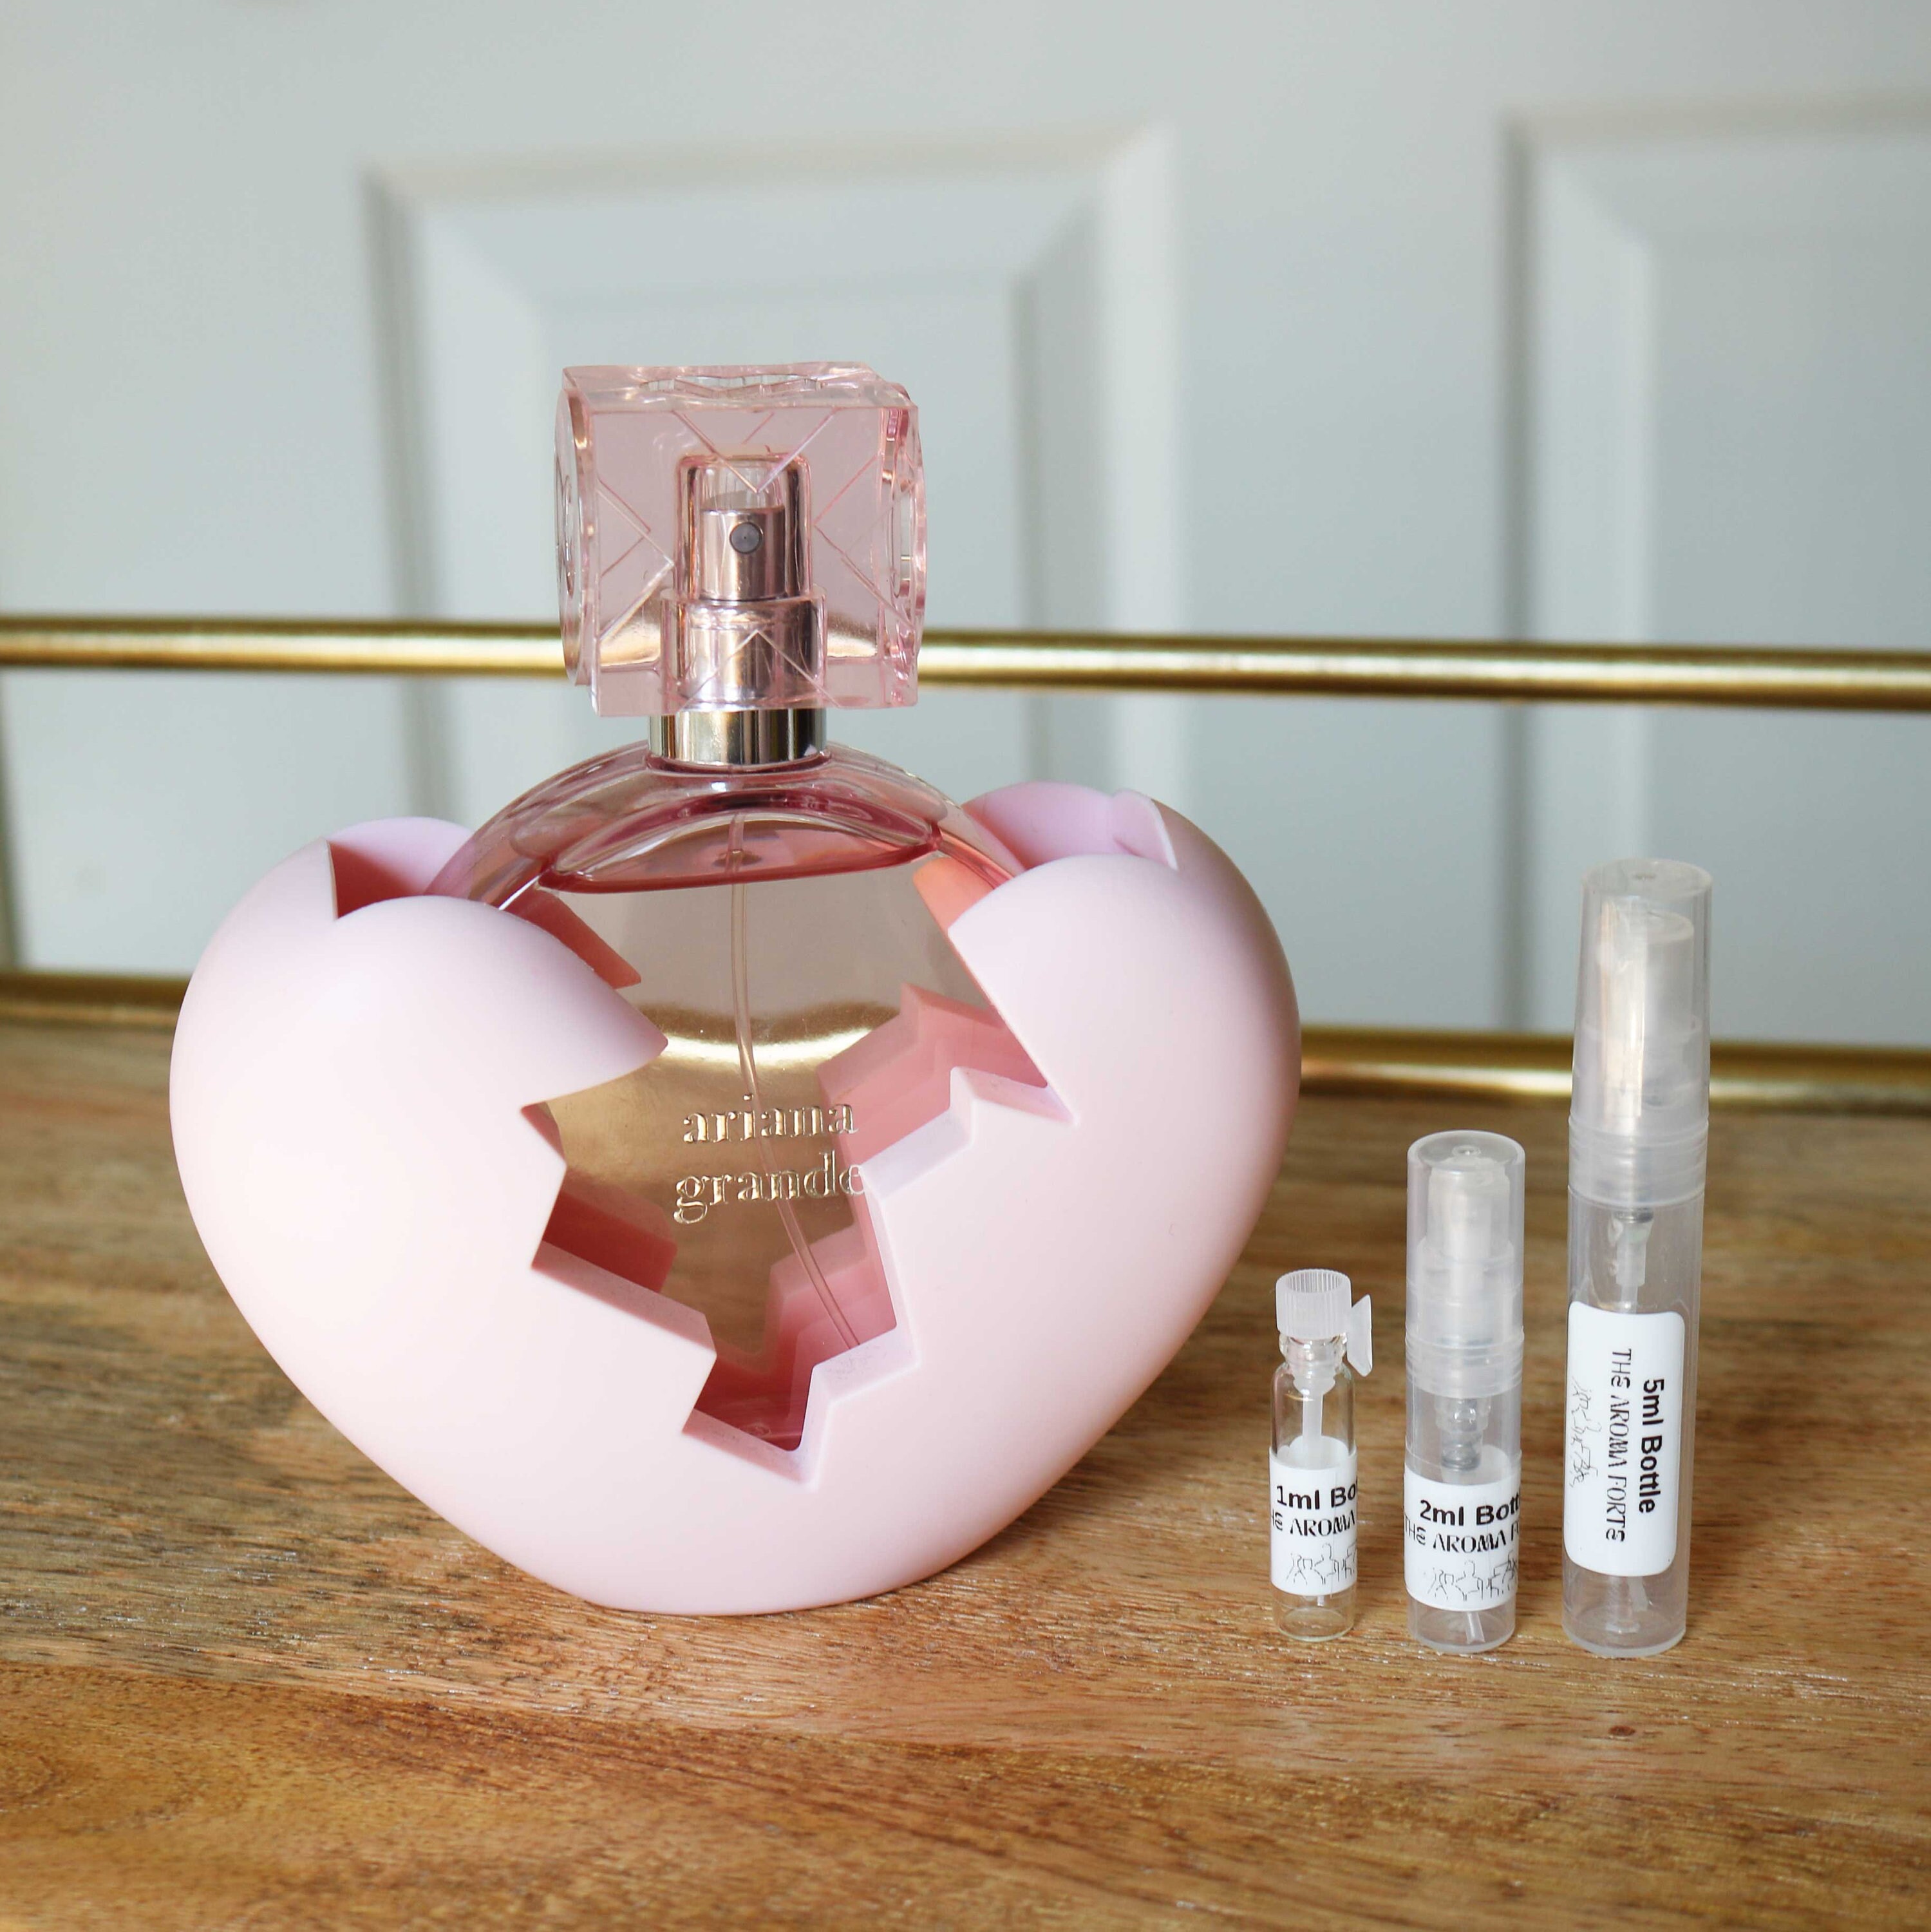 Unisex Perfume Les Sables Roses for Christmas